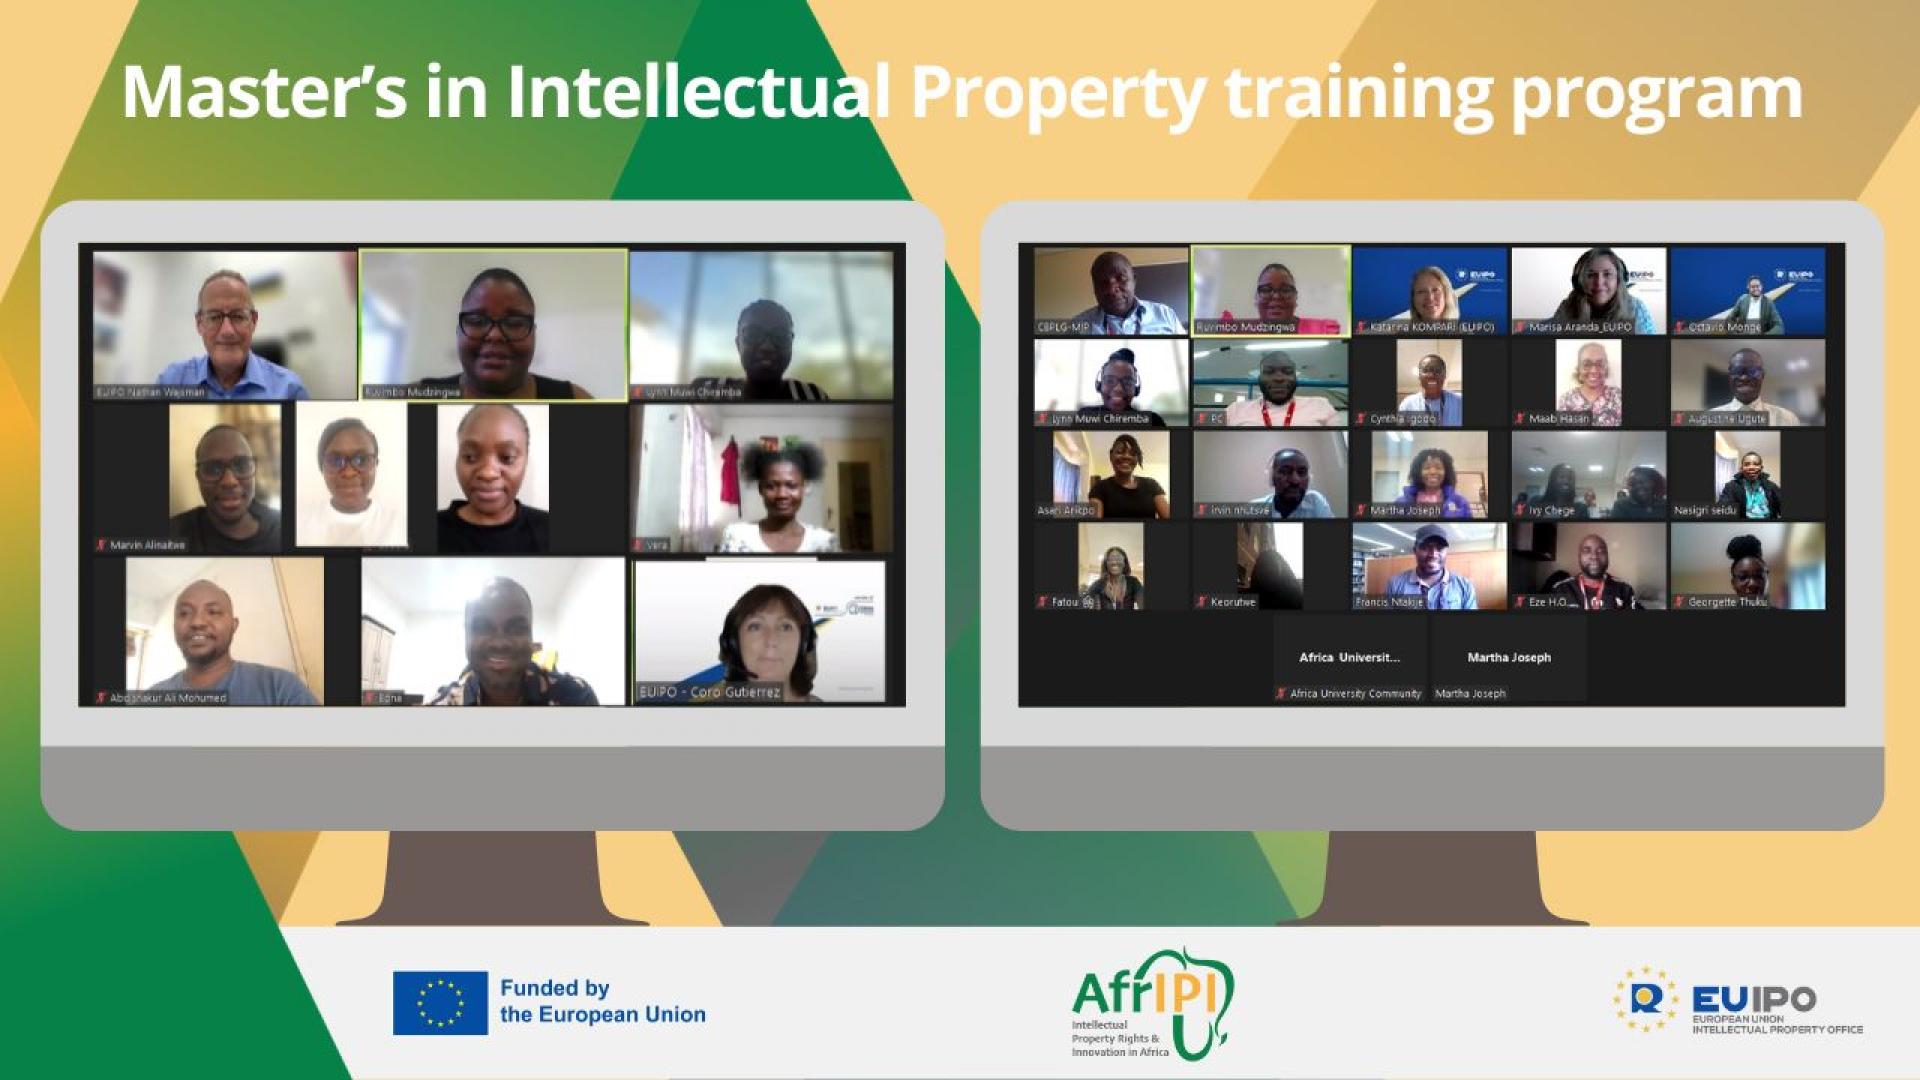 Master’s in Intellectual Property training program